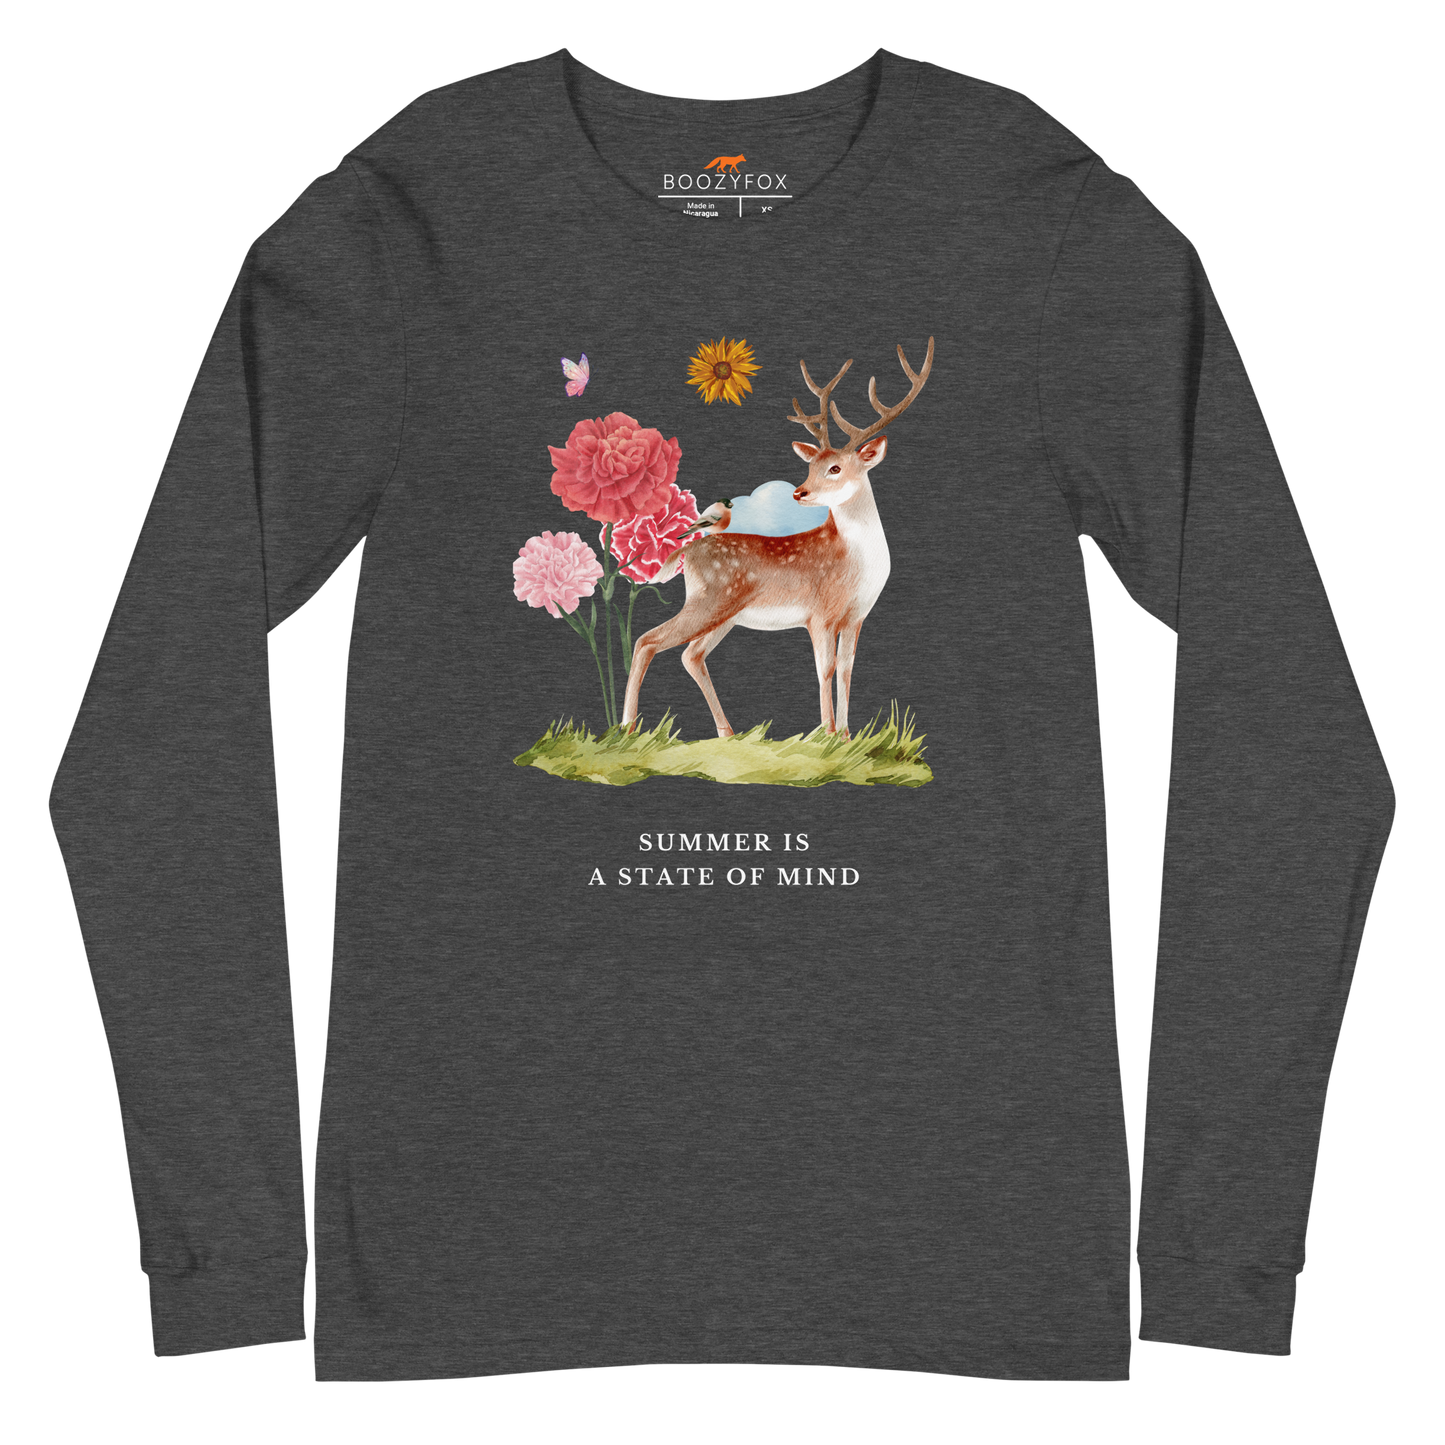 Dark Grey Heather Summer Is a State of Mind Long Sleeve Tee featuring a Summer Is a State of Mind graphic on the chest - Cute Summer Long Sleeve Graphic Tees - Boozy Fox